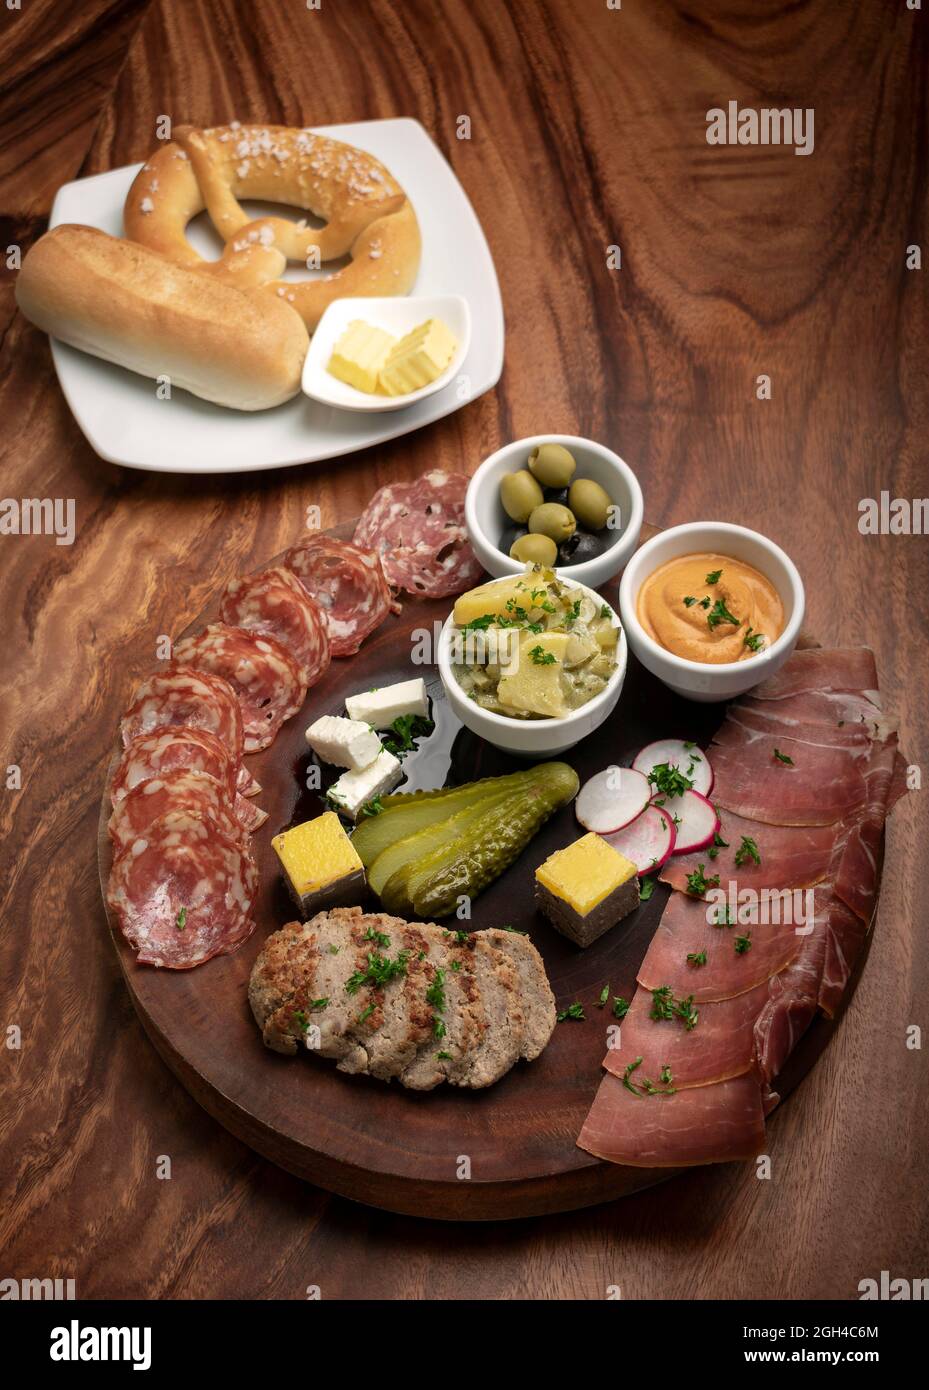 german cold cuts tapas snack platter with meats and bread on wood table background Stock Photo